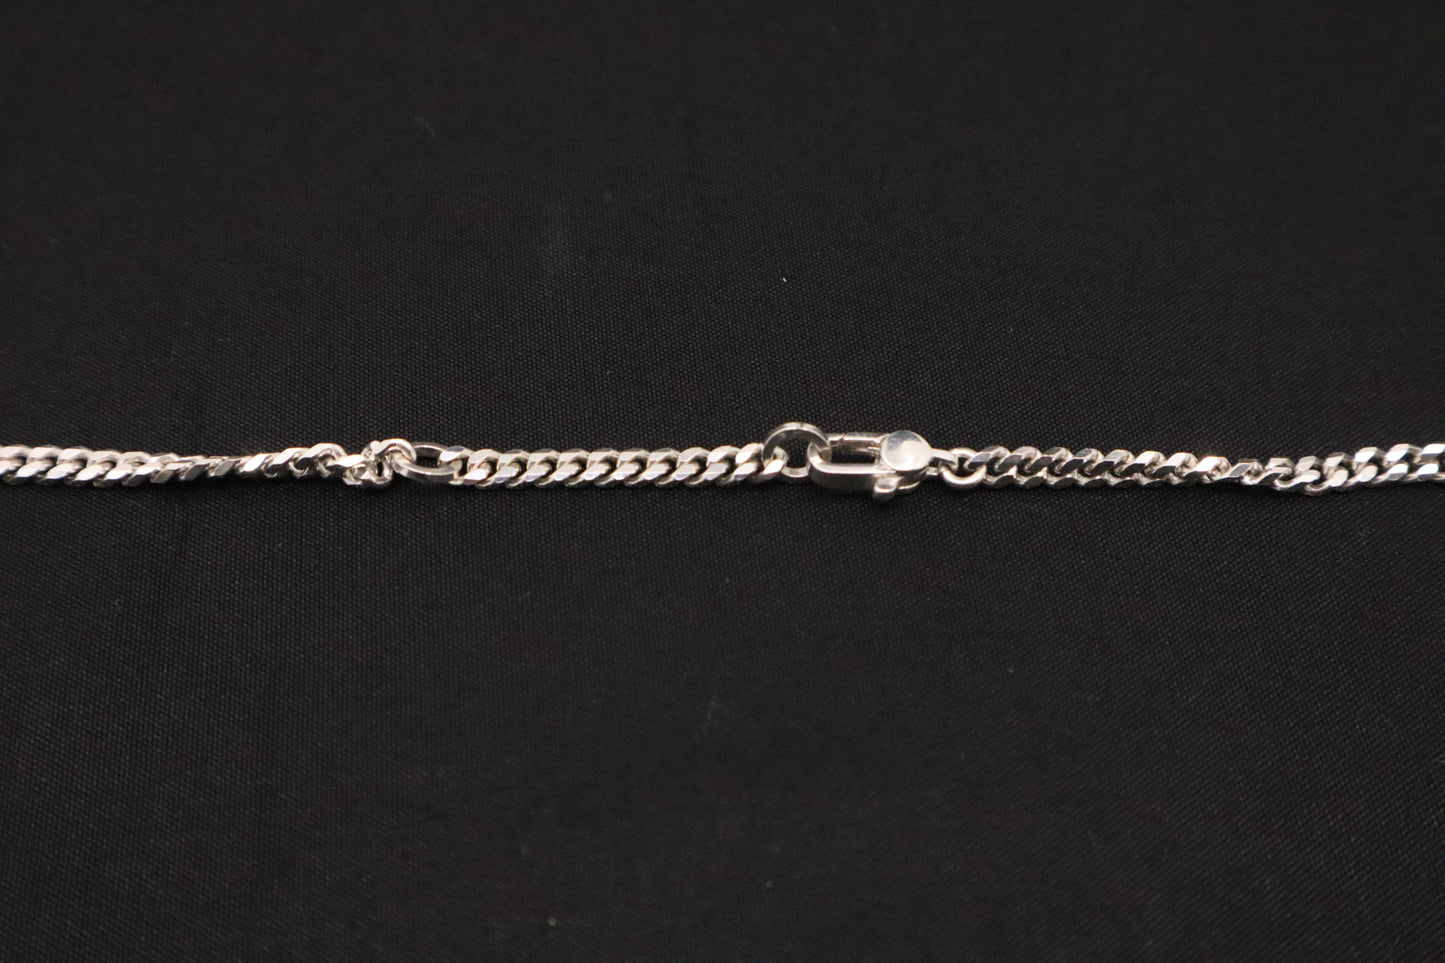 Gucci Necklace in Sterling Silver